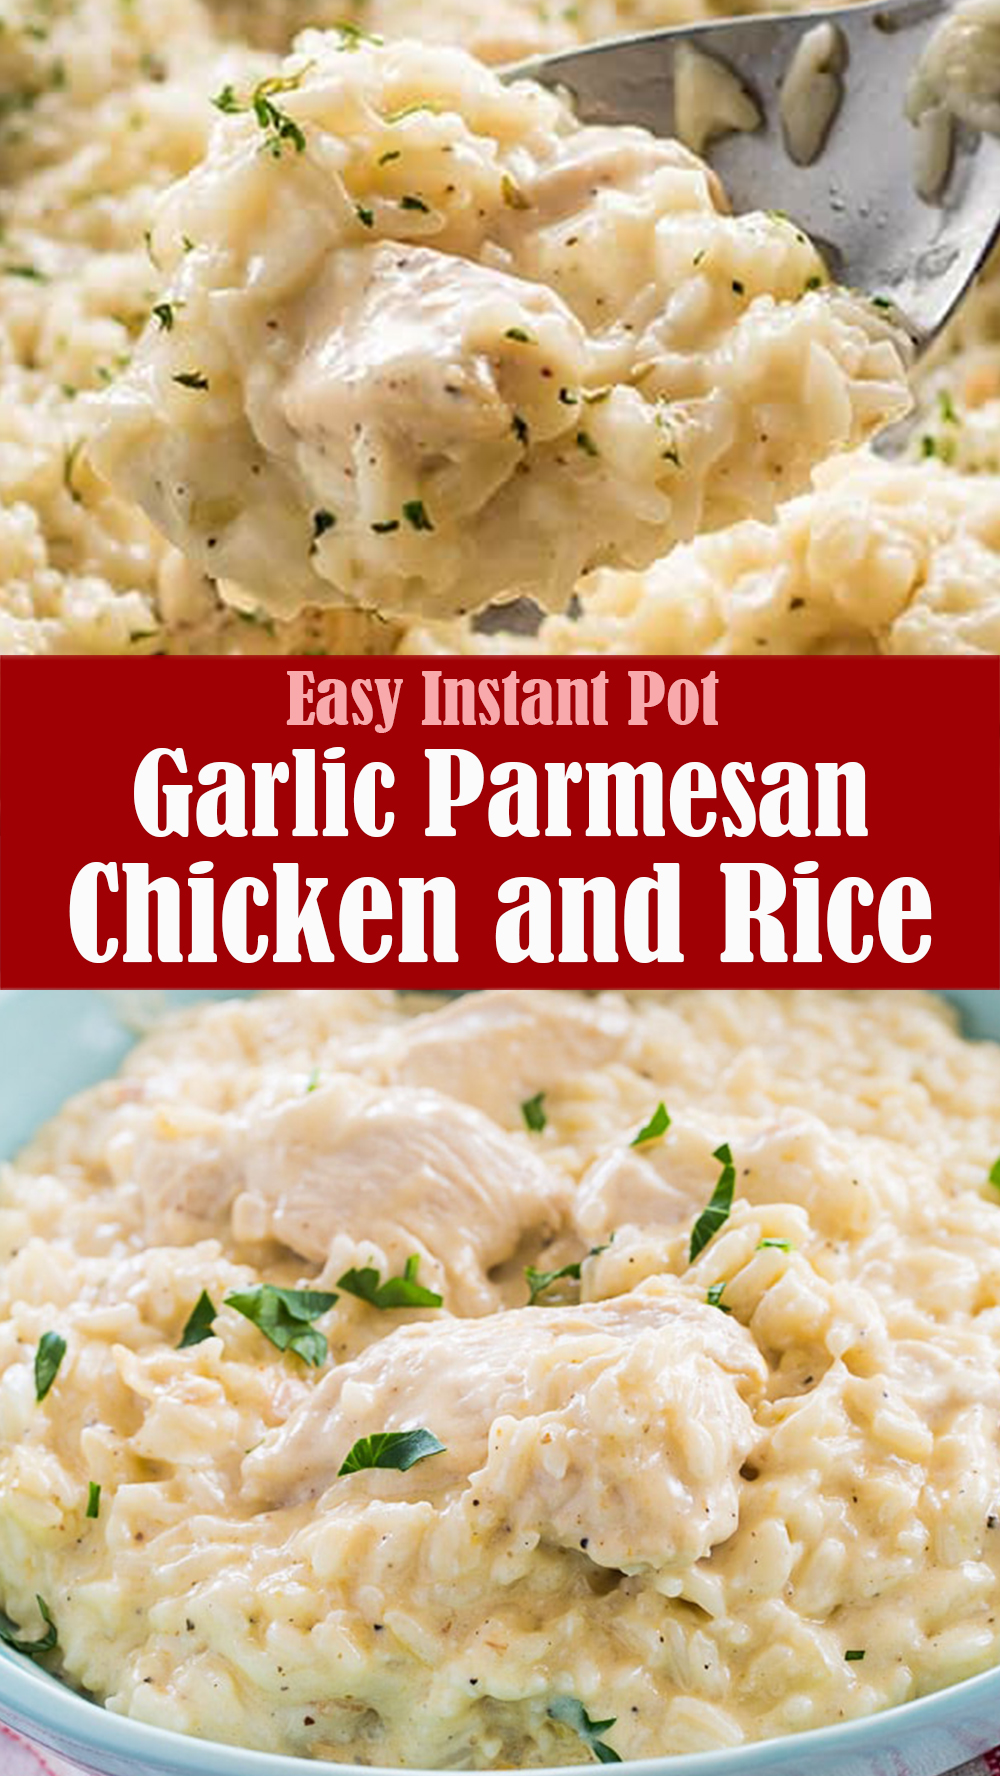 Easy Instant Pot Garlic Parmesan Chicken and Rice